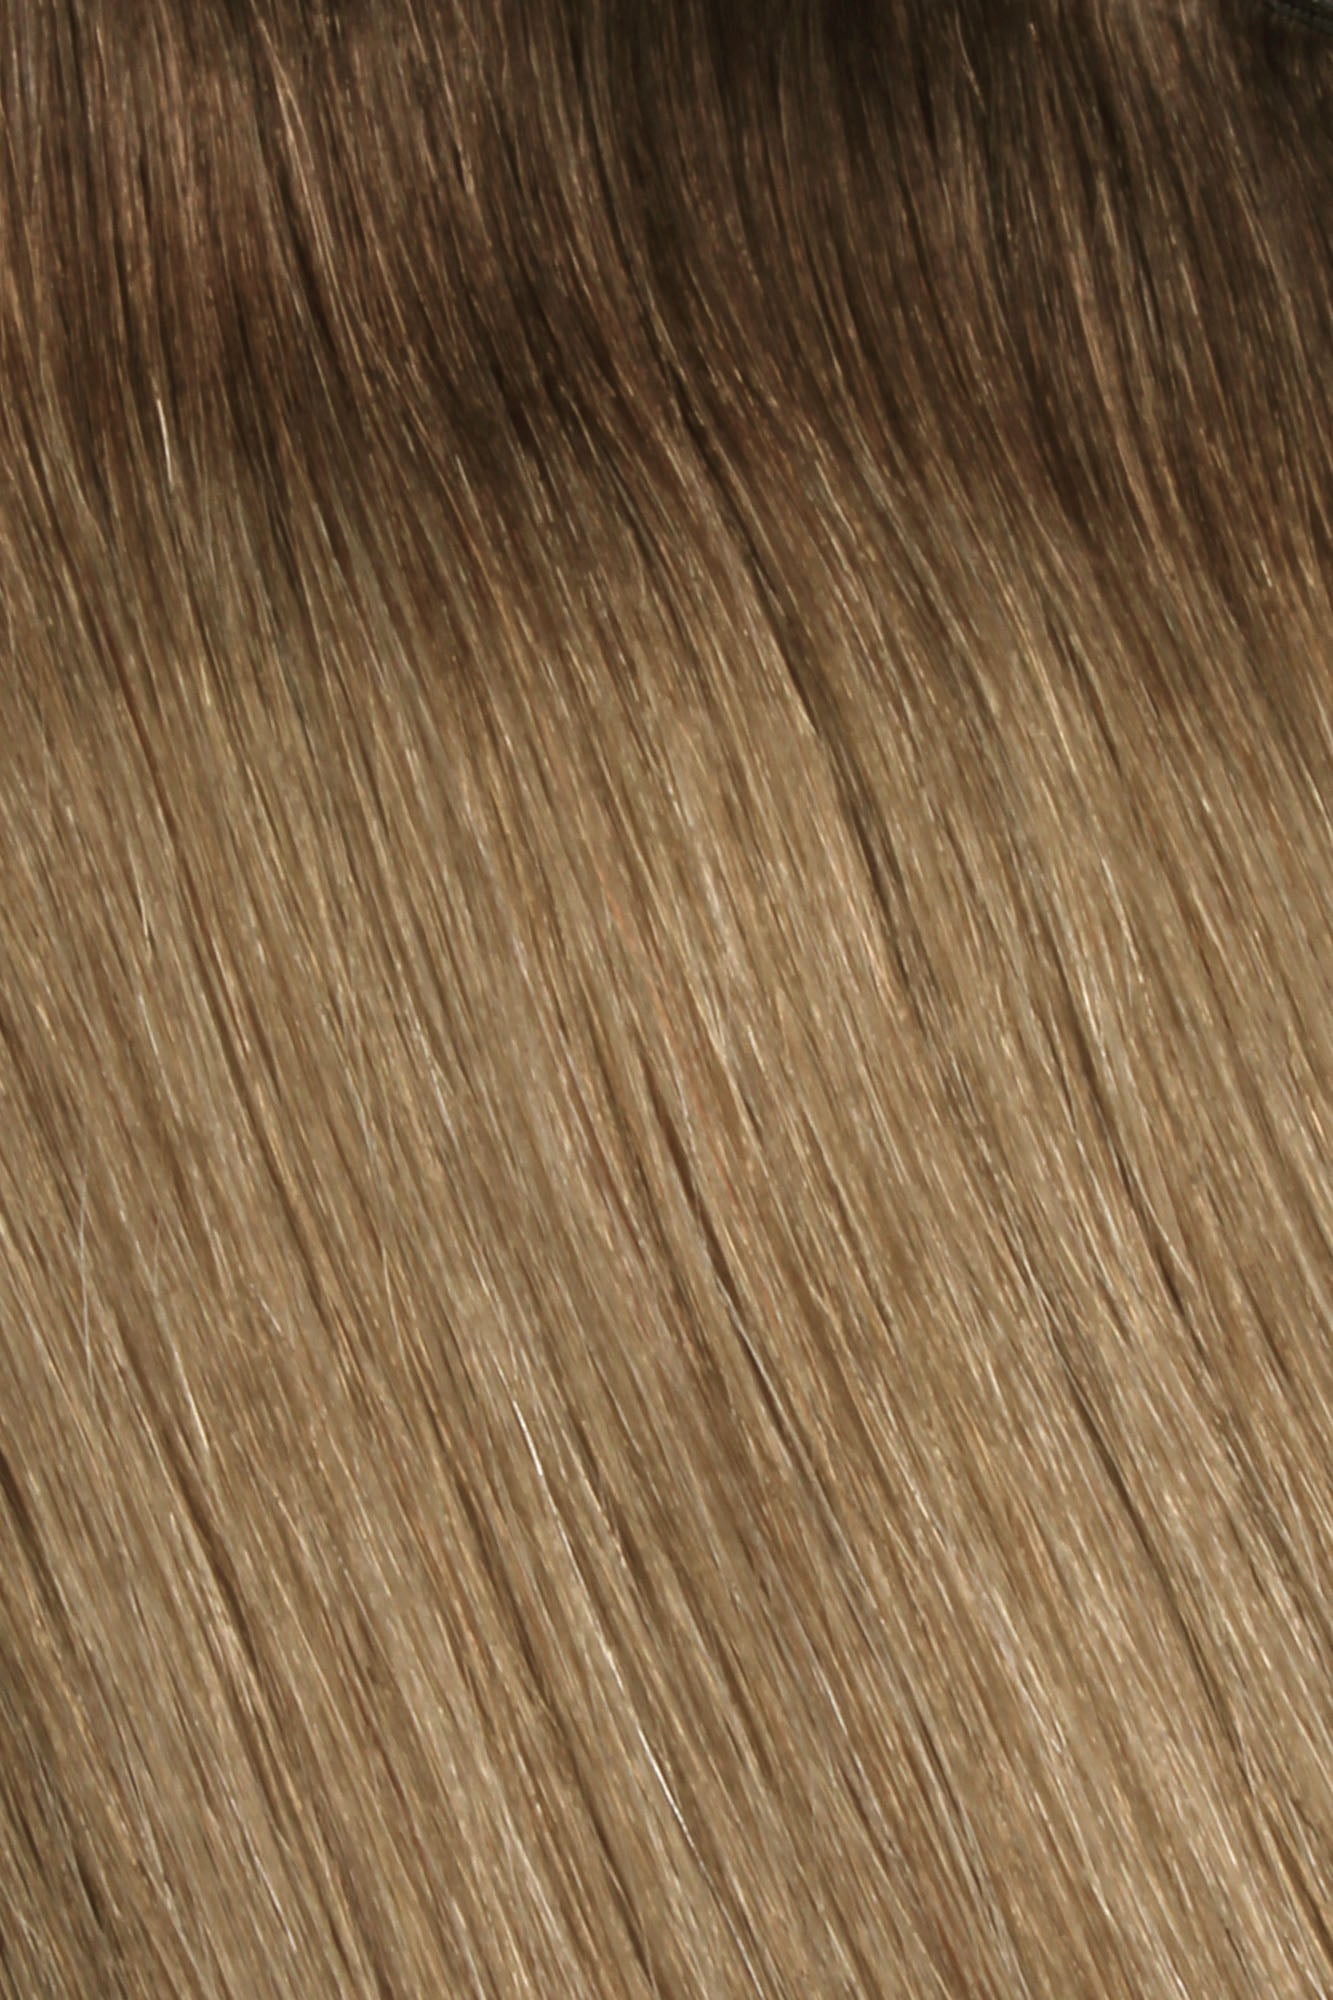 Nano Bonds 24 Inches - SWAY Hair Extensions Rooted-Champagne-Chestnut-R5-8-22 Ultra-fine, invisible bonds for a flawless, natural look. 100% Remy Human hair, lightweight and versatile. Reusable and perfect for individual or salon use.